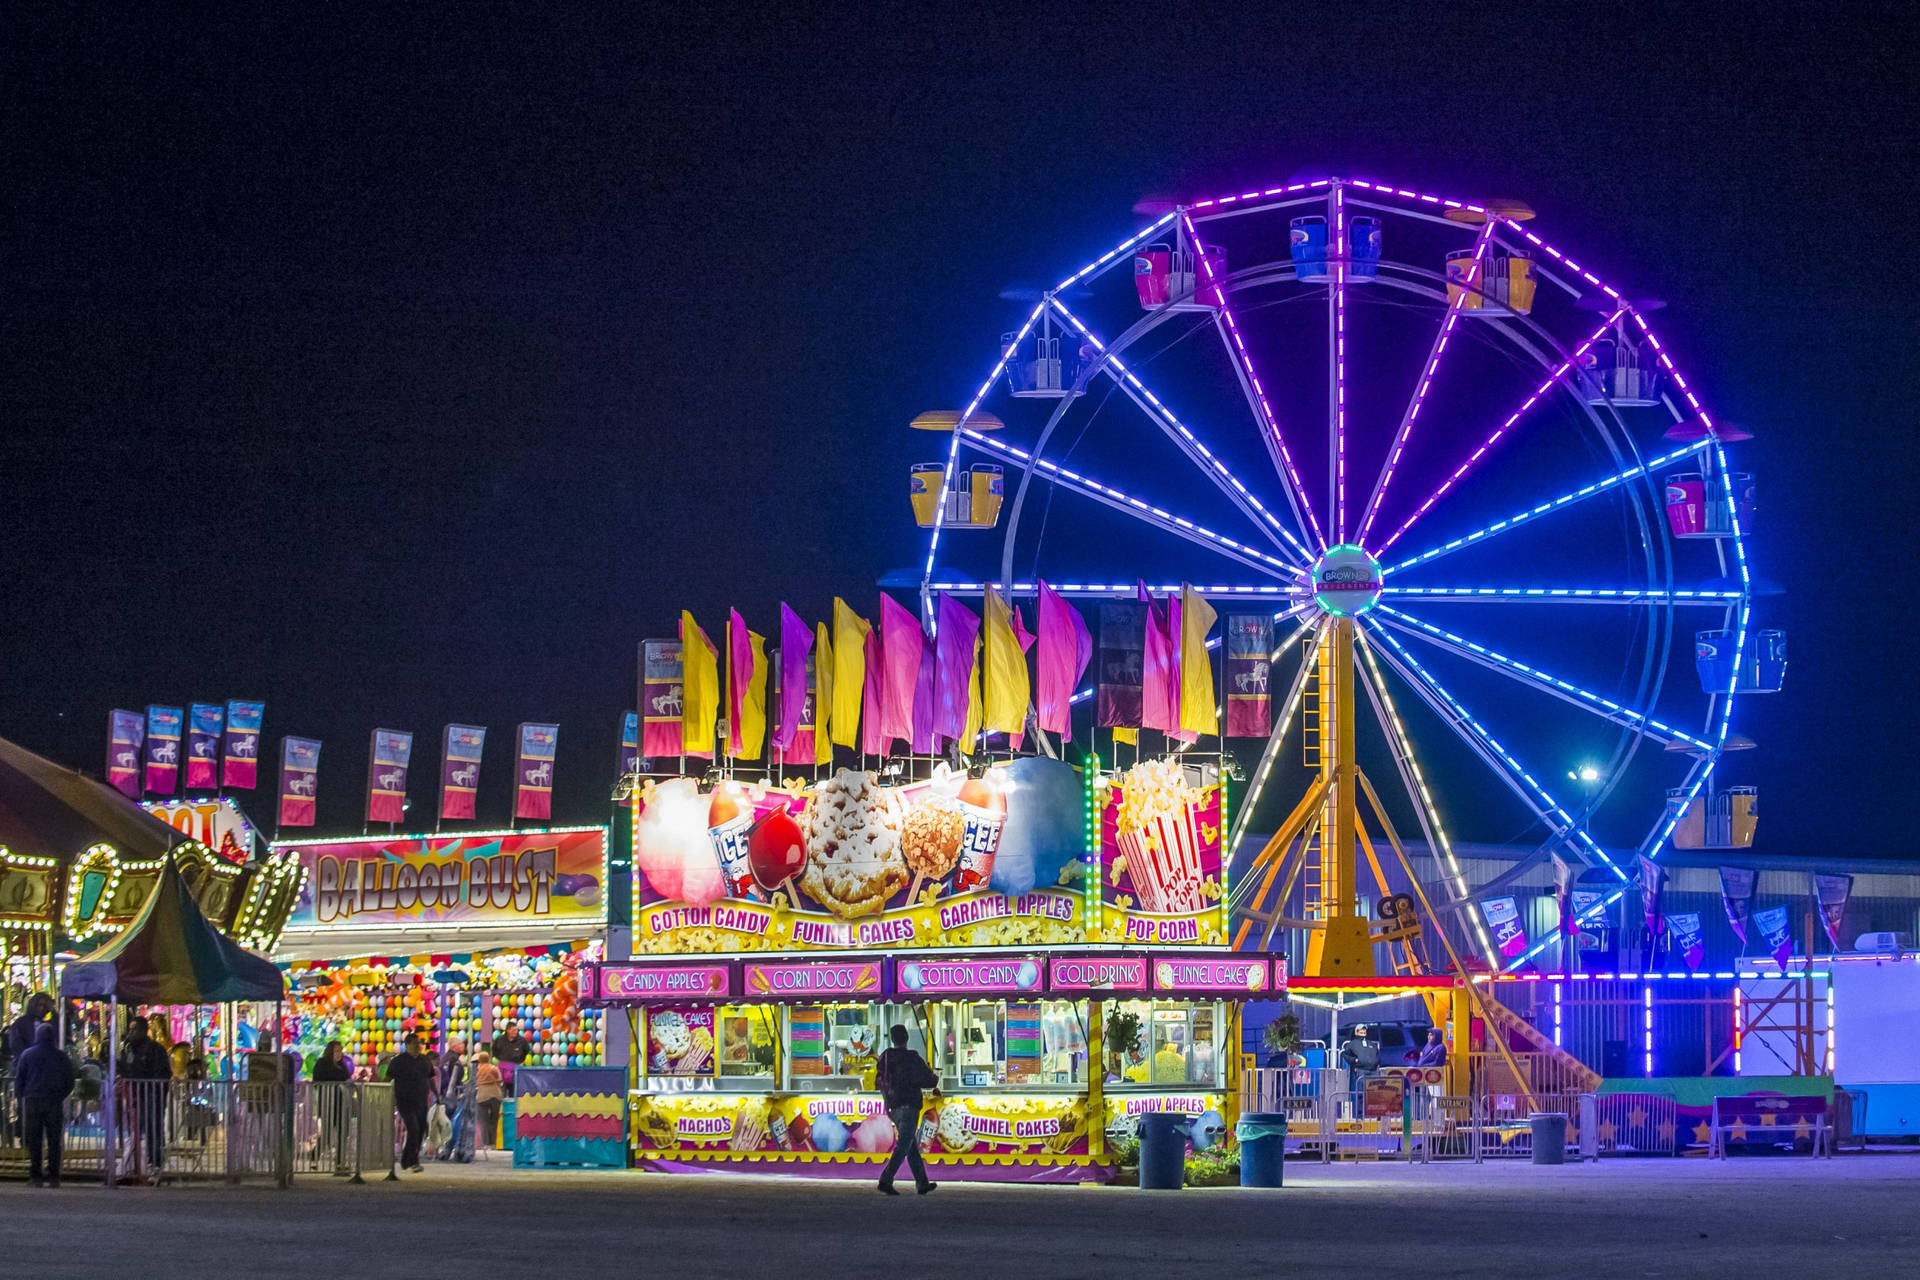 Caption: "Thrilling rides and vibrant lights at the Clark County Fair and Rodeo" Wallpaper